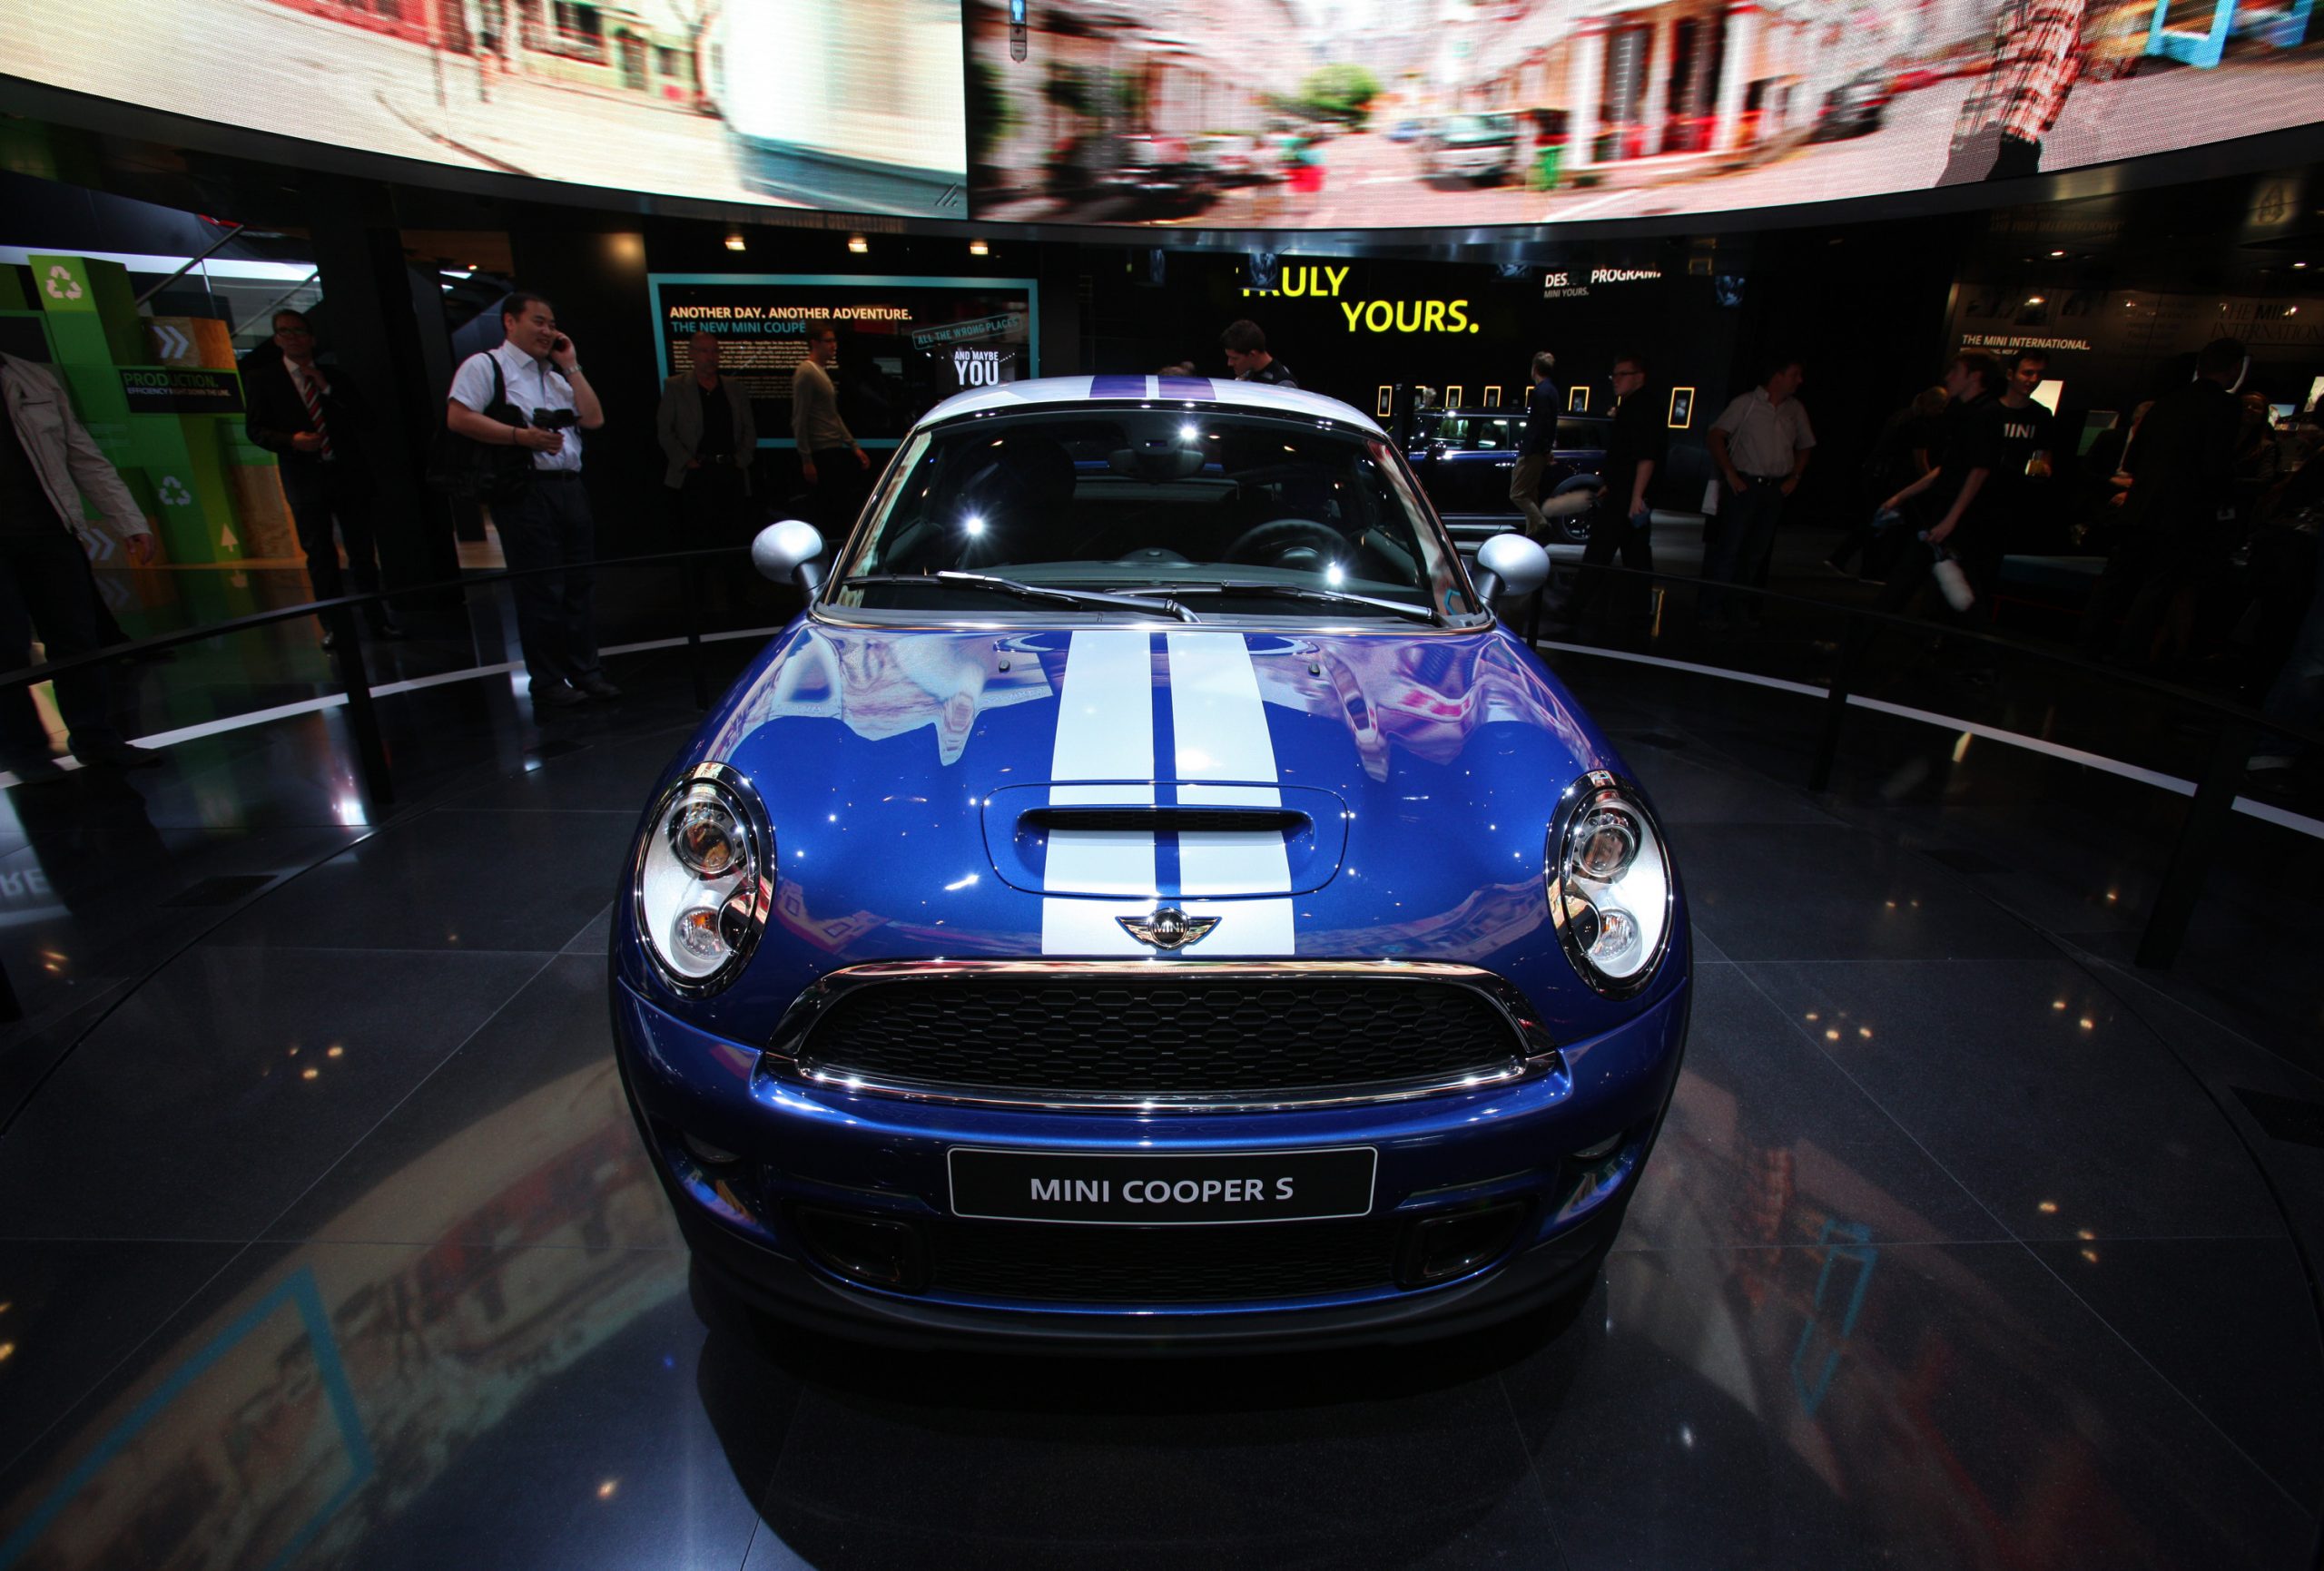 A blue and white 2011 Mini Cooper S on display